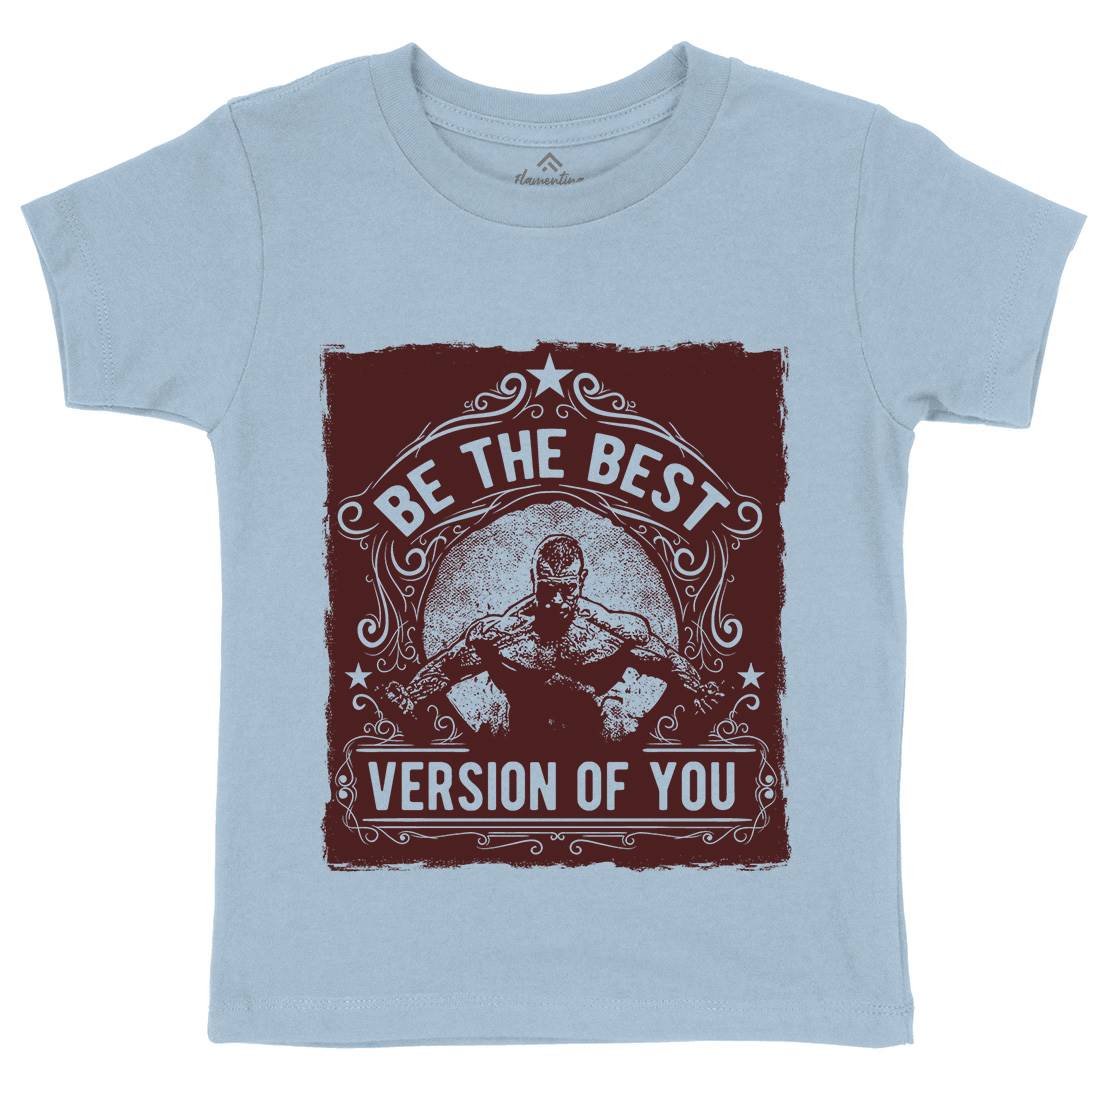 The Best Version Of You Kids Organic Crew Neck T-Shirt Gym C985